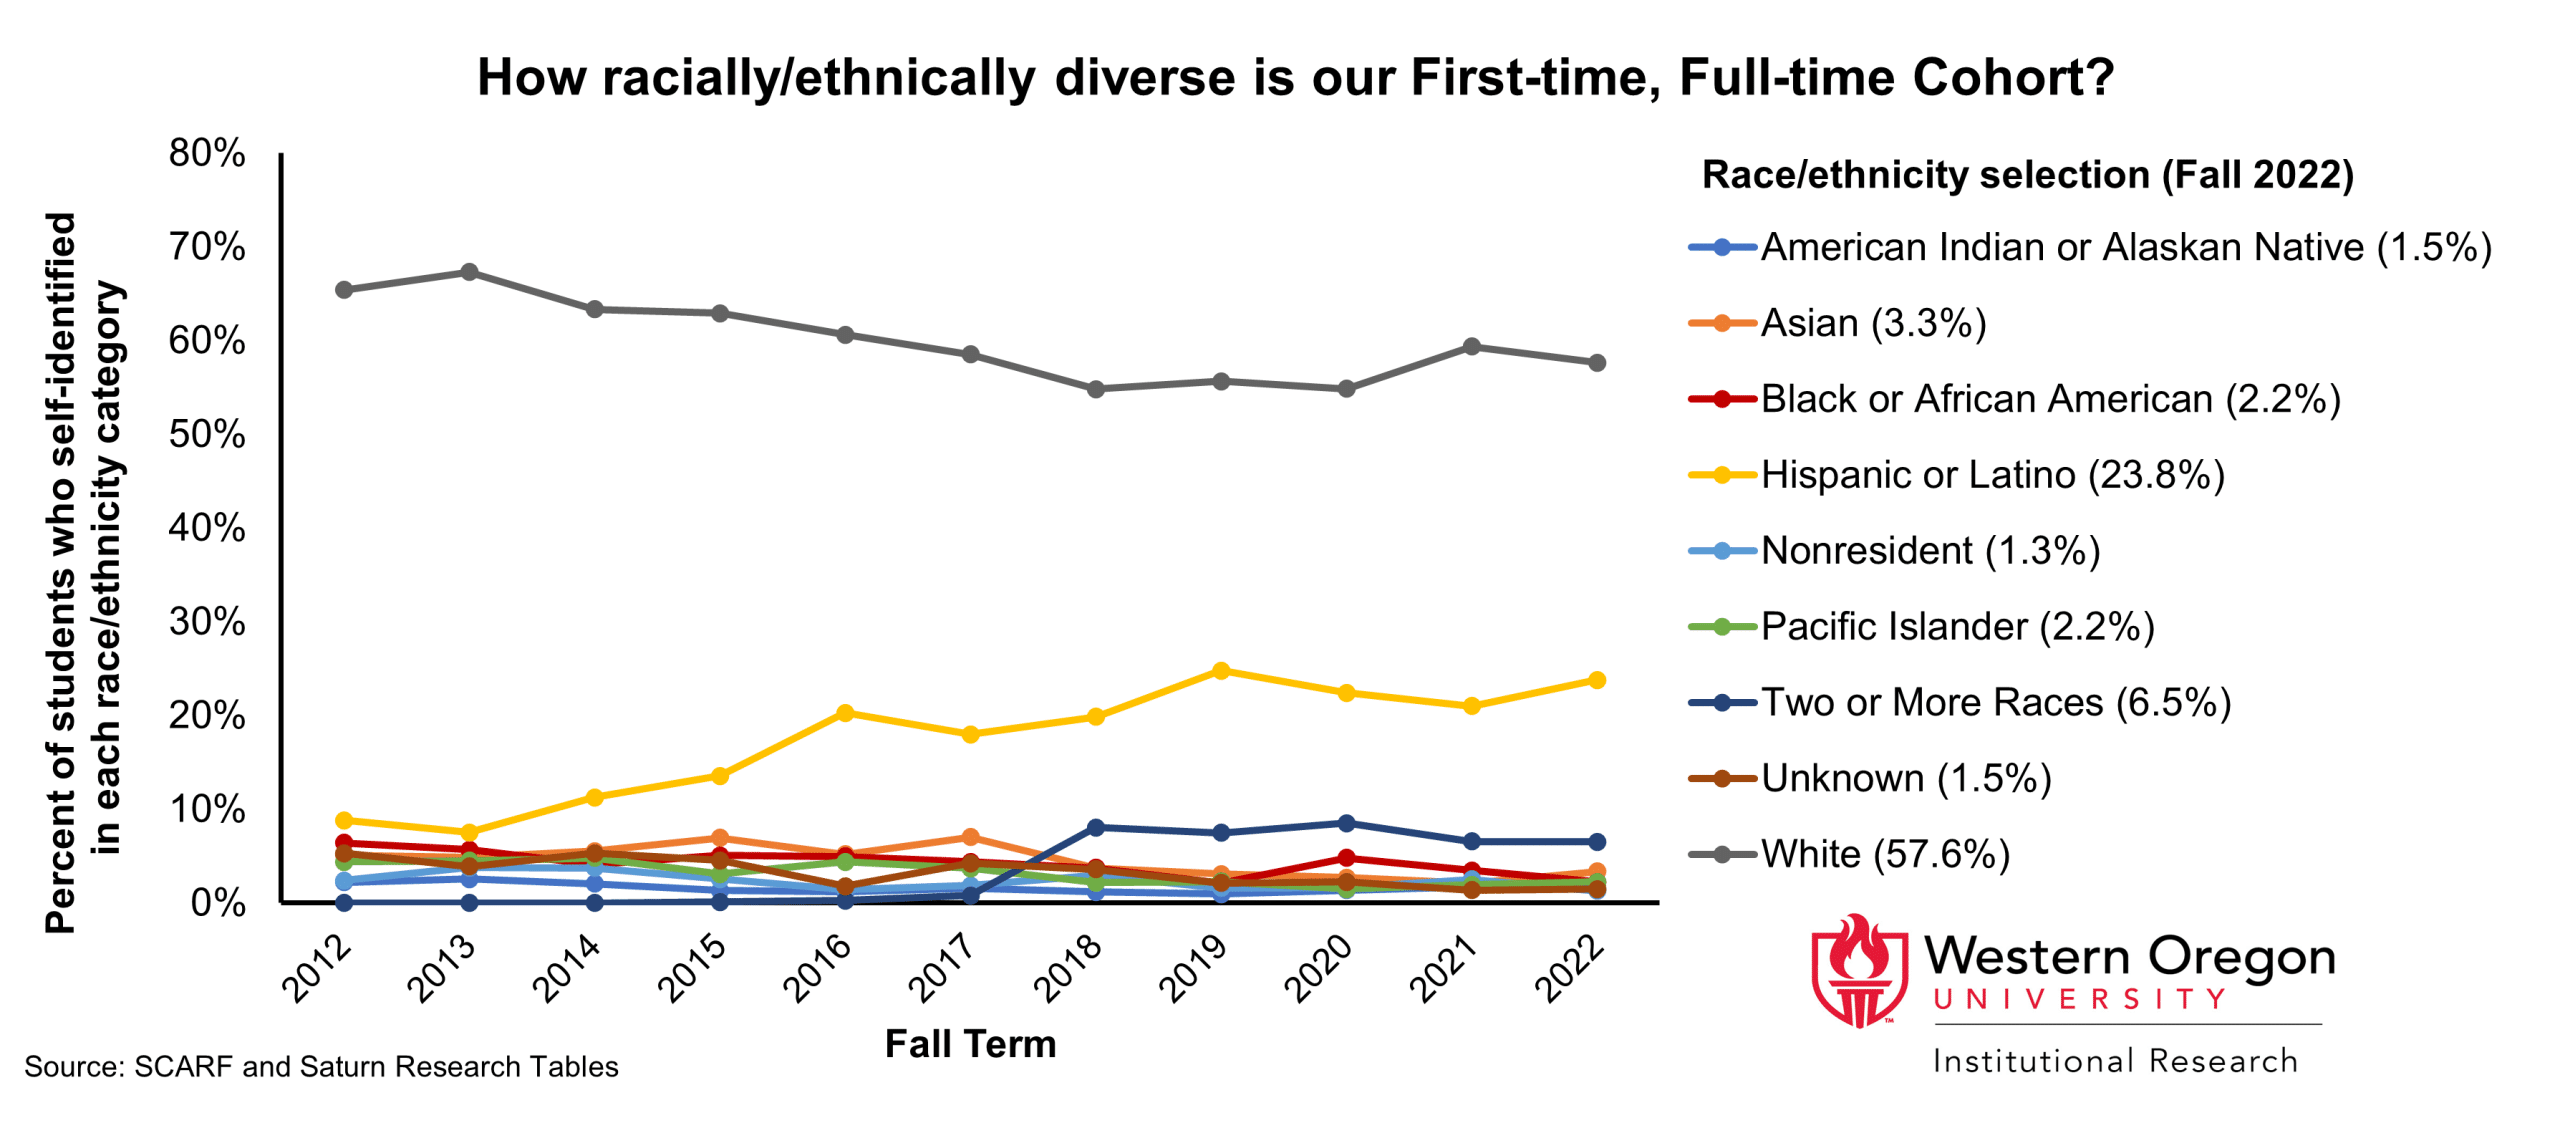 The percentage of first-time, full-time students at WOU who identify as Hispanic or Latino has been steadily increasing since 2012.